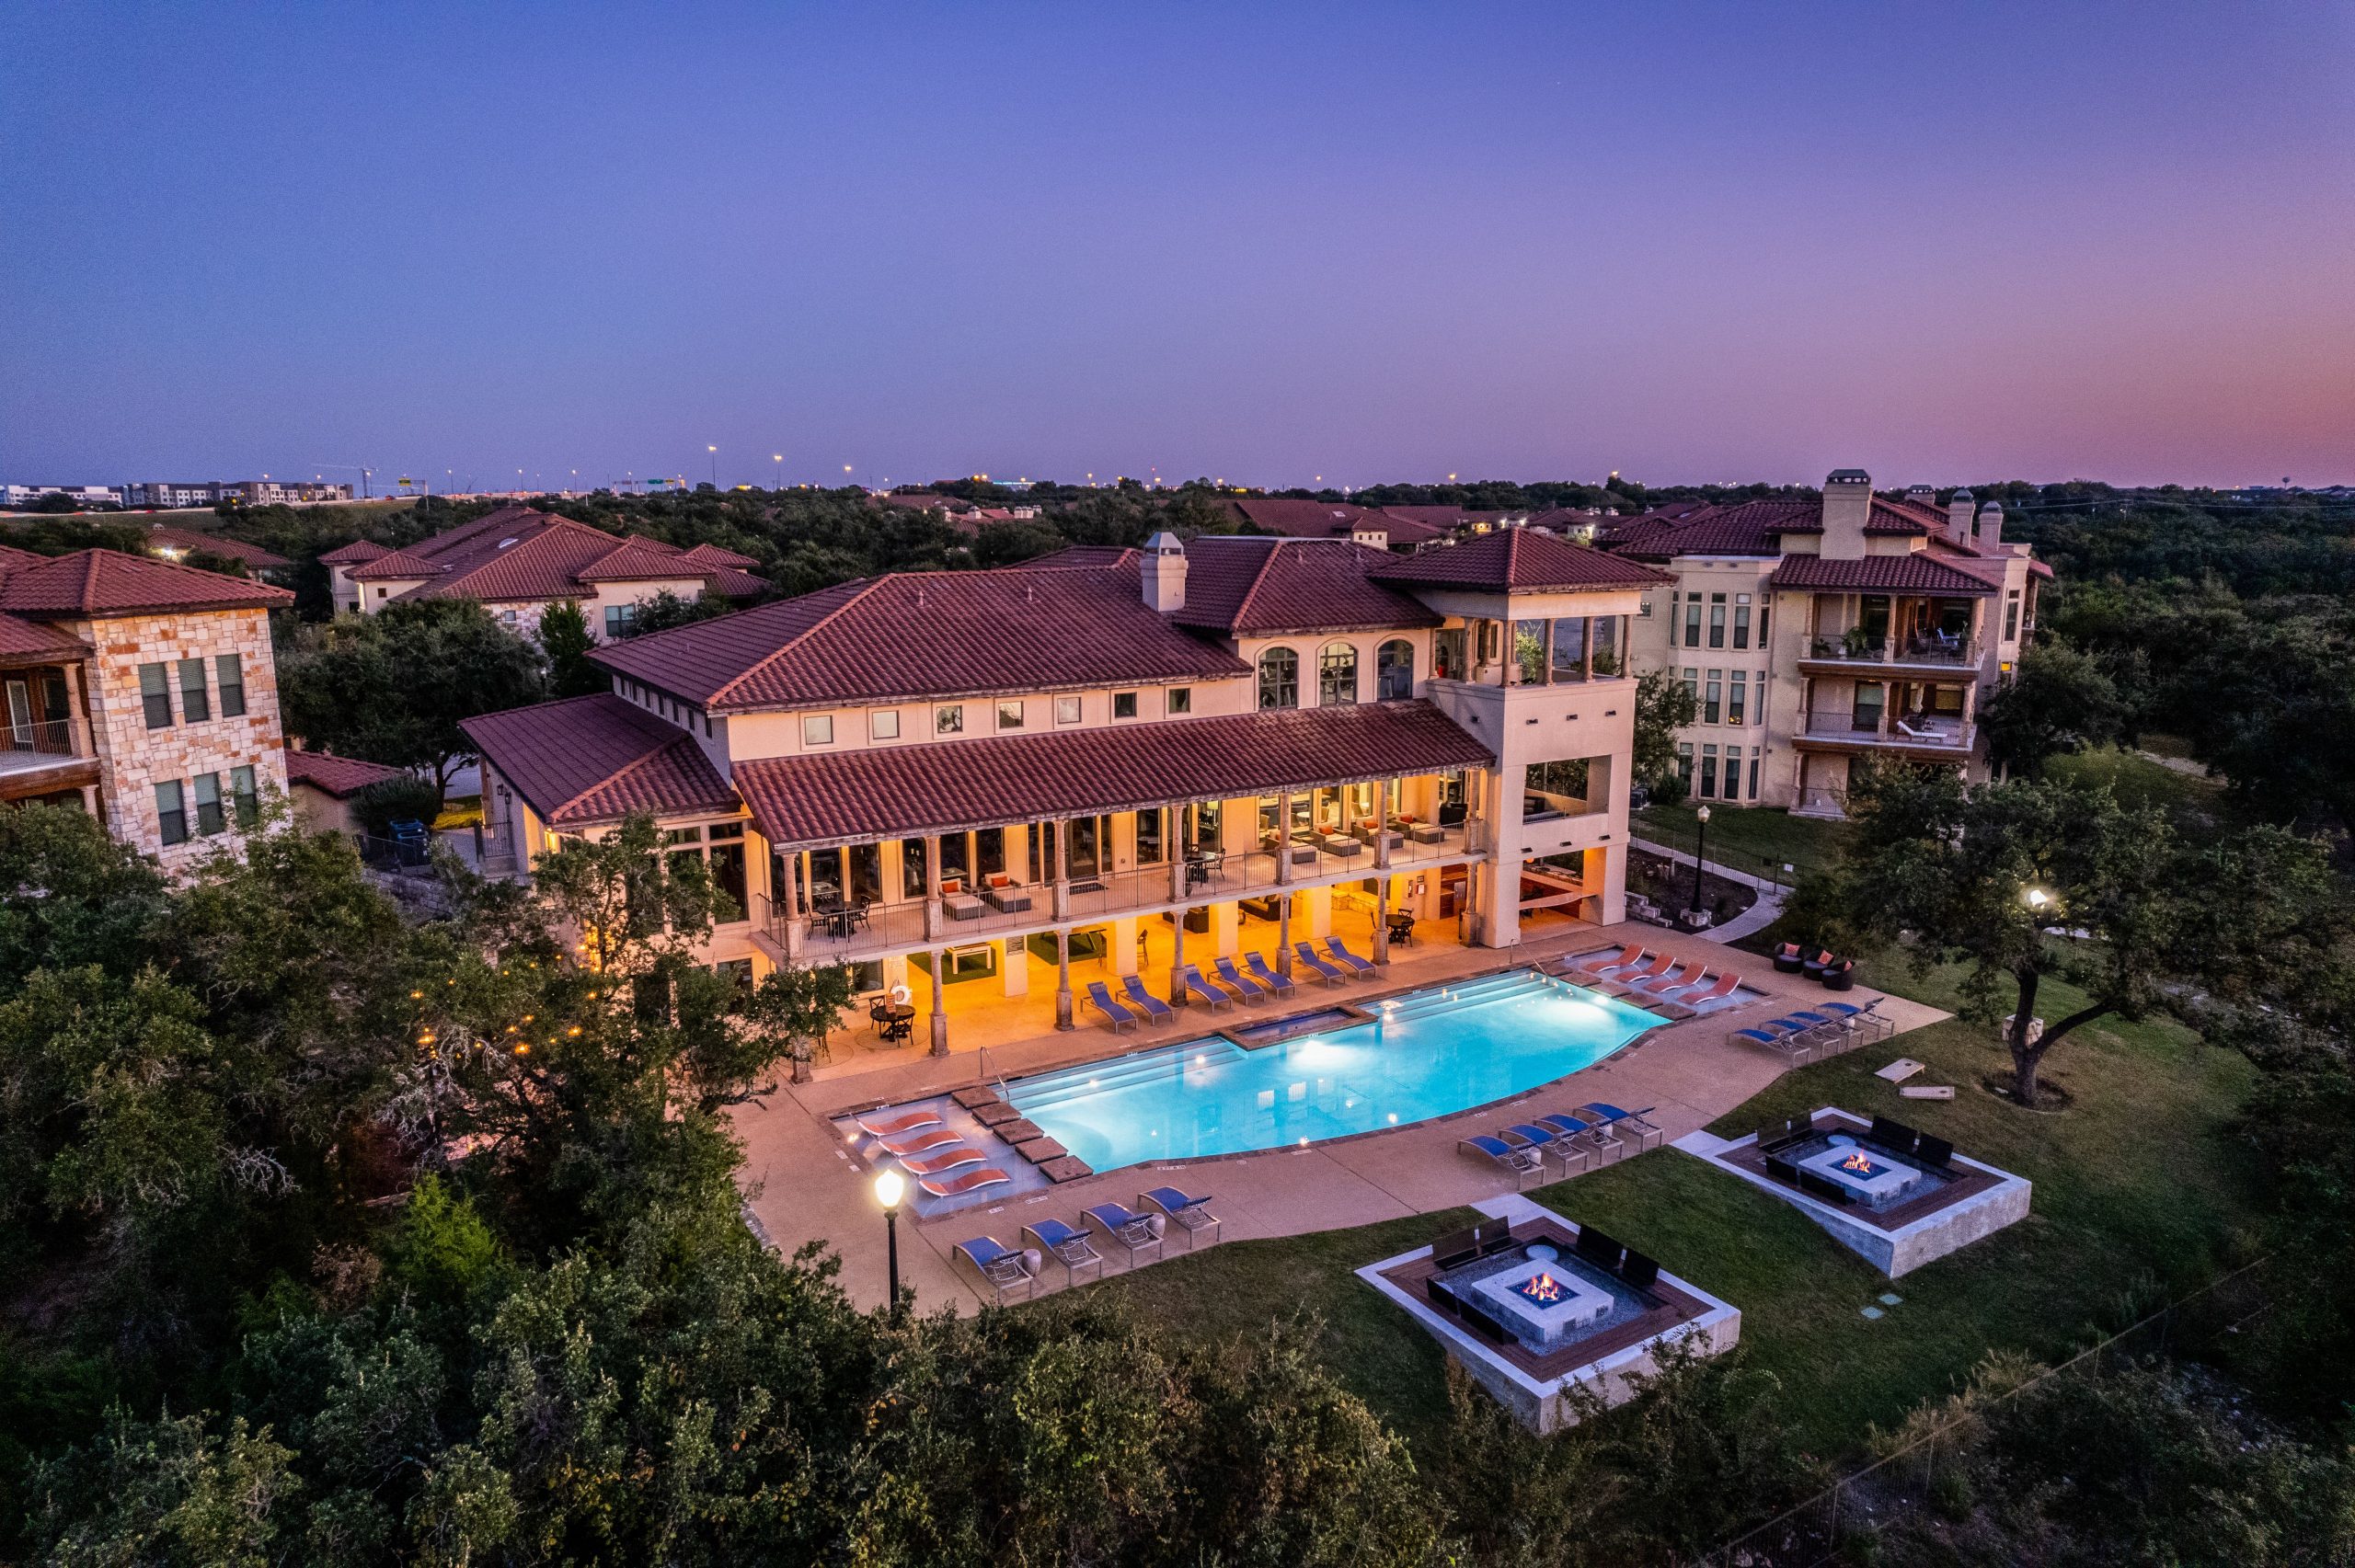 stunning drone view of a multi-family property and its amenities at twilight